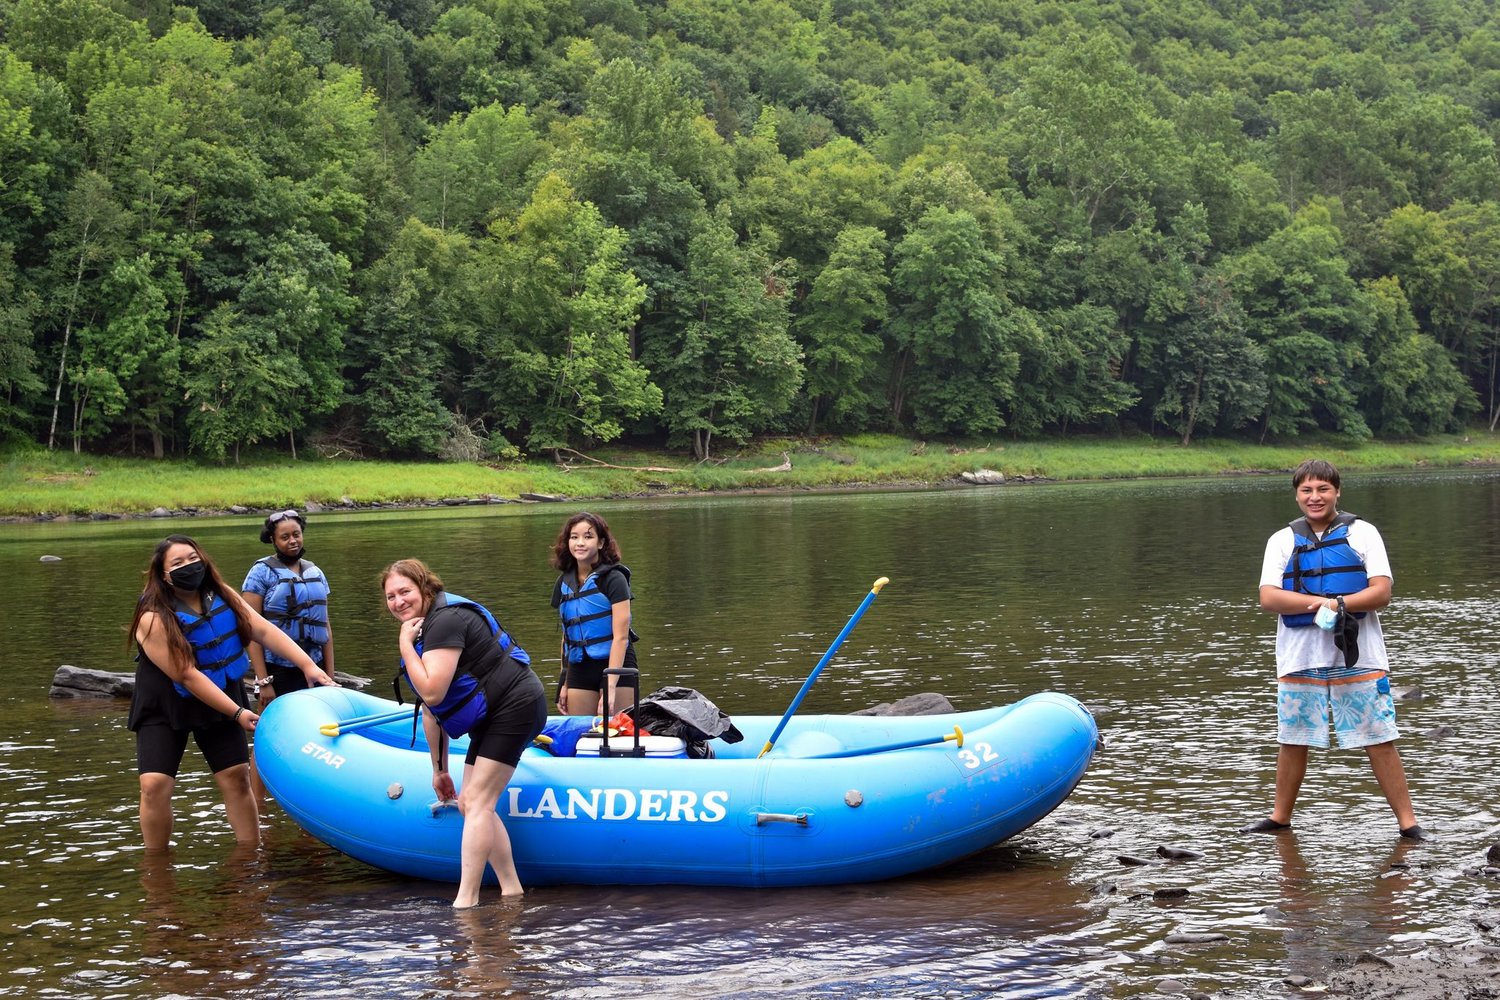 The Cabrera group from Middletown, NY brought 20 people along to the Upper Delaware Council’s Family Raft Trip. Pictured are Julianna Cabrera, left, Sarah Steed, Makayla Cabrera, Pattie Cabrera and Joseph Cabrera preparing to launch from Lander’s Minisink Base.